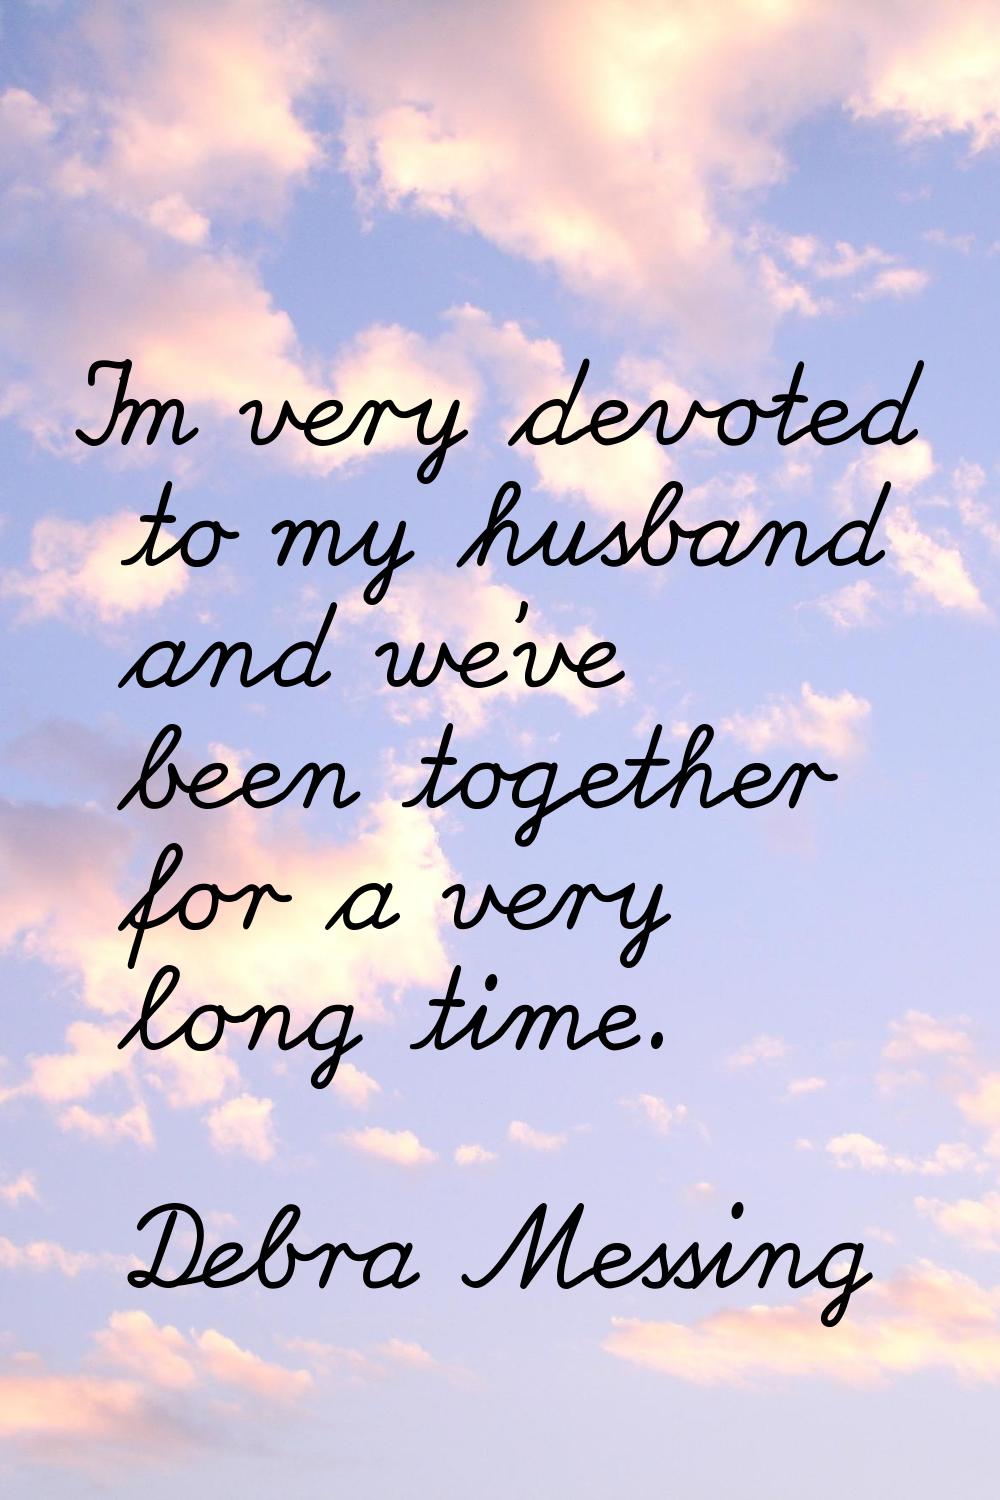 I'm very devoted to my husband and we've been together for a very long time.